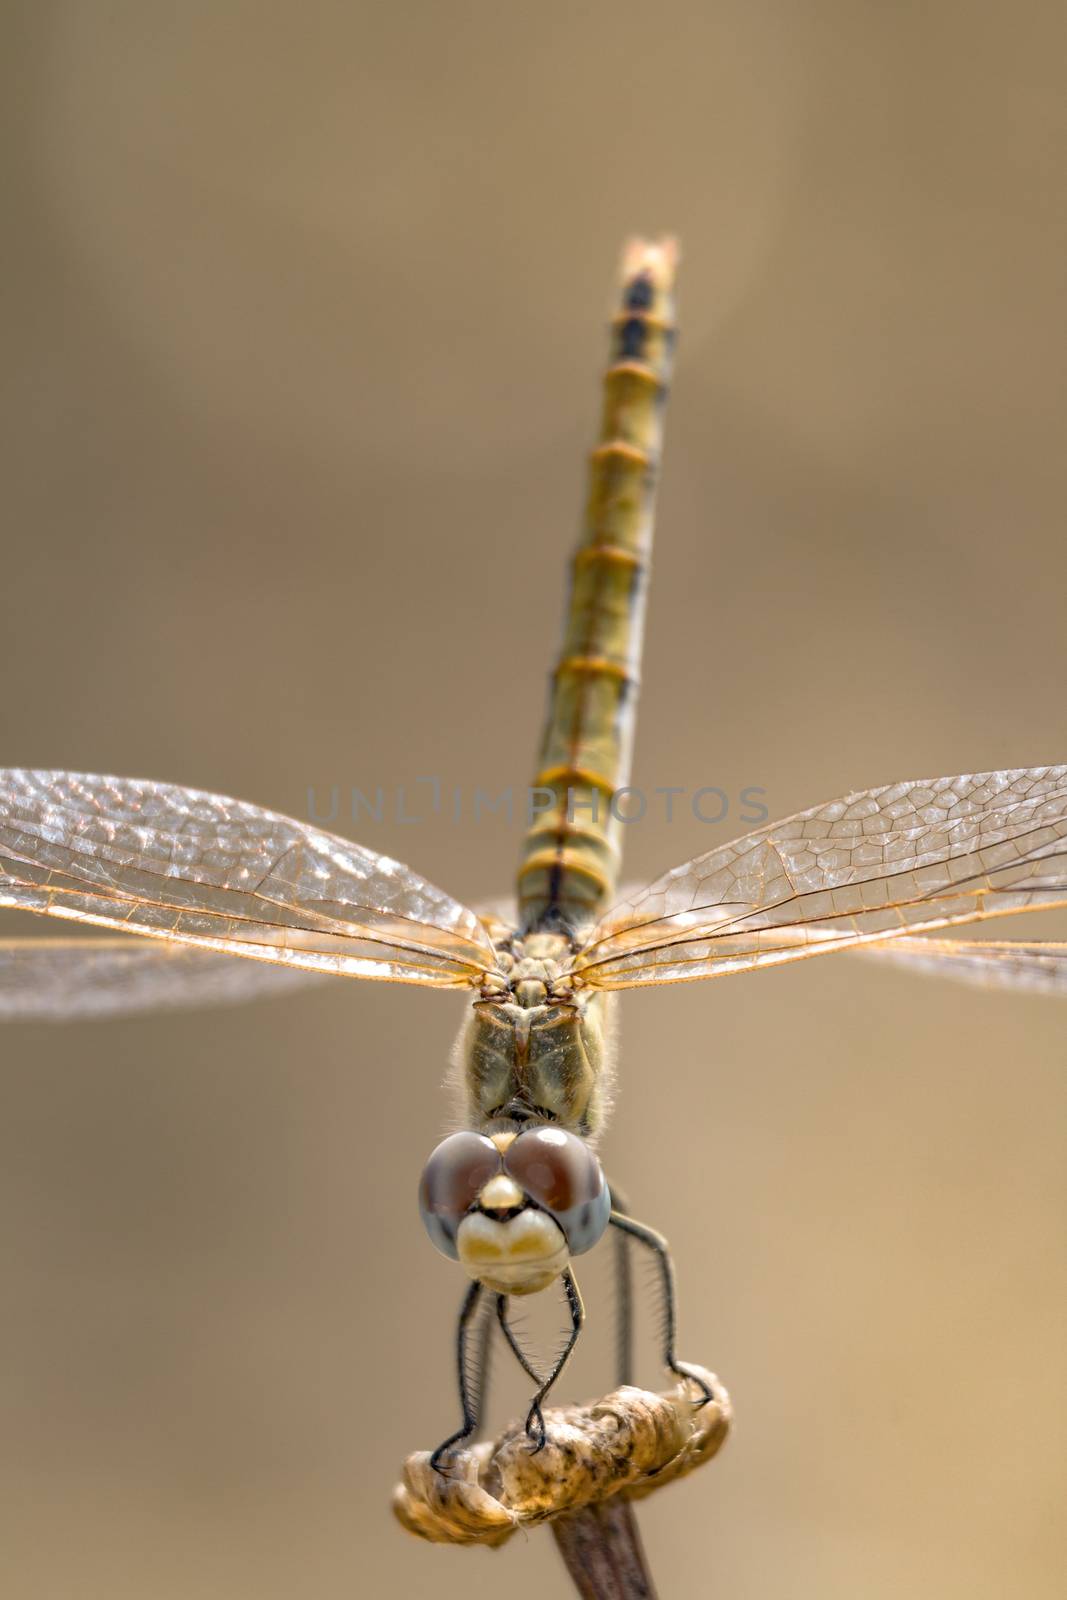 Image of a dragonfly ( sympetrum sp ) accomplished like photo of approximation.